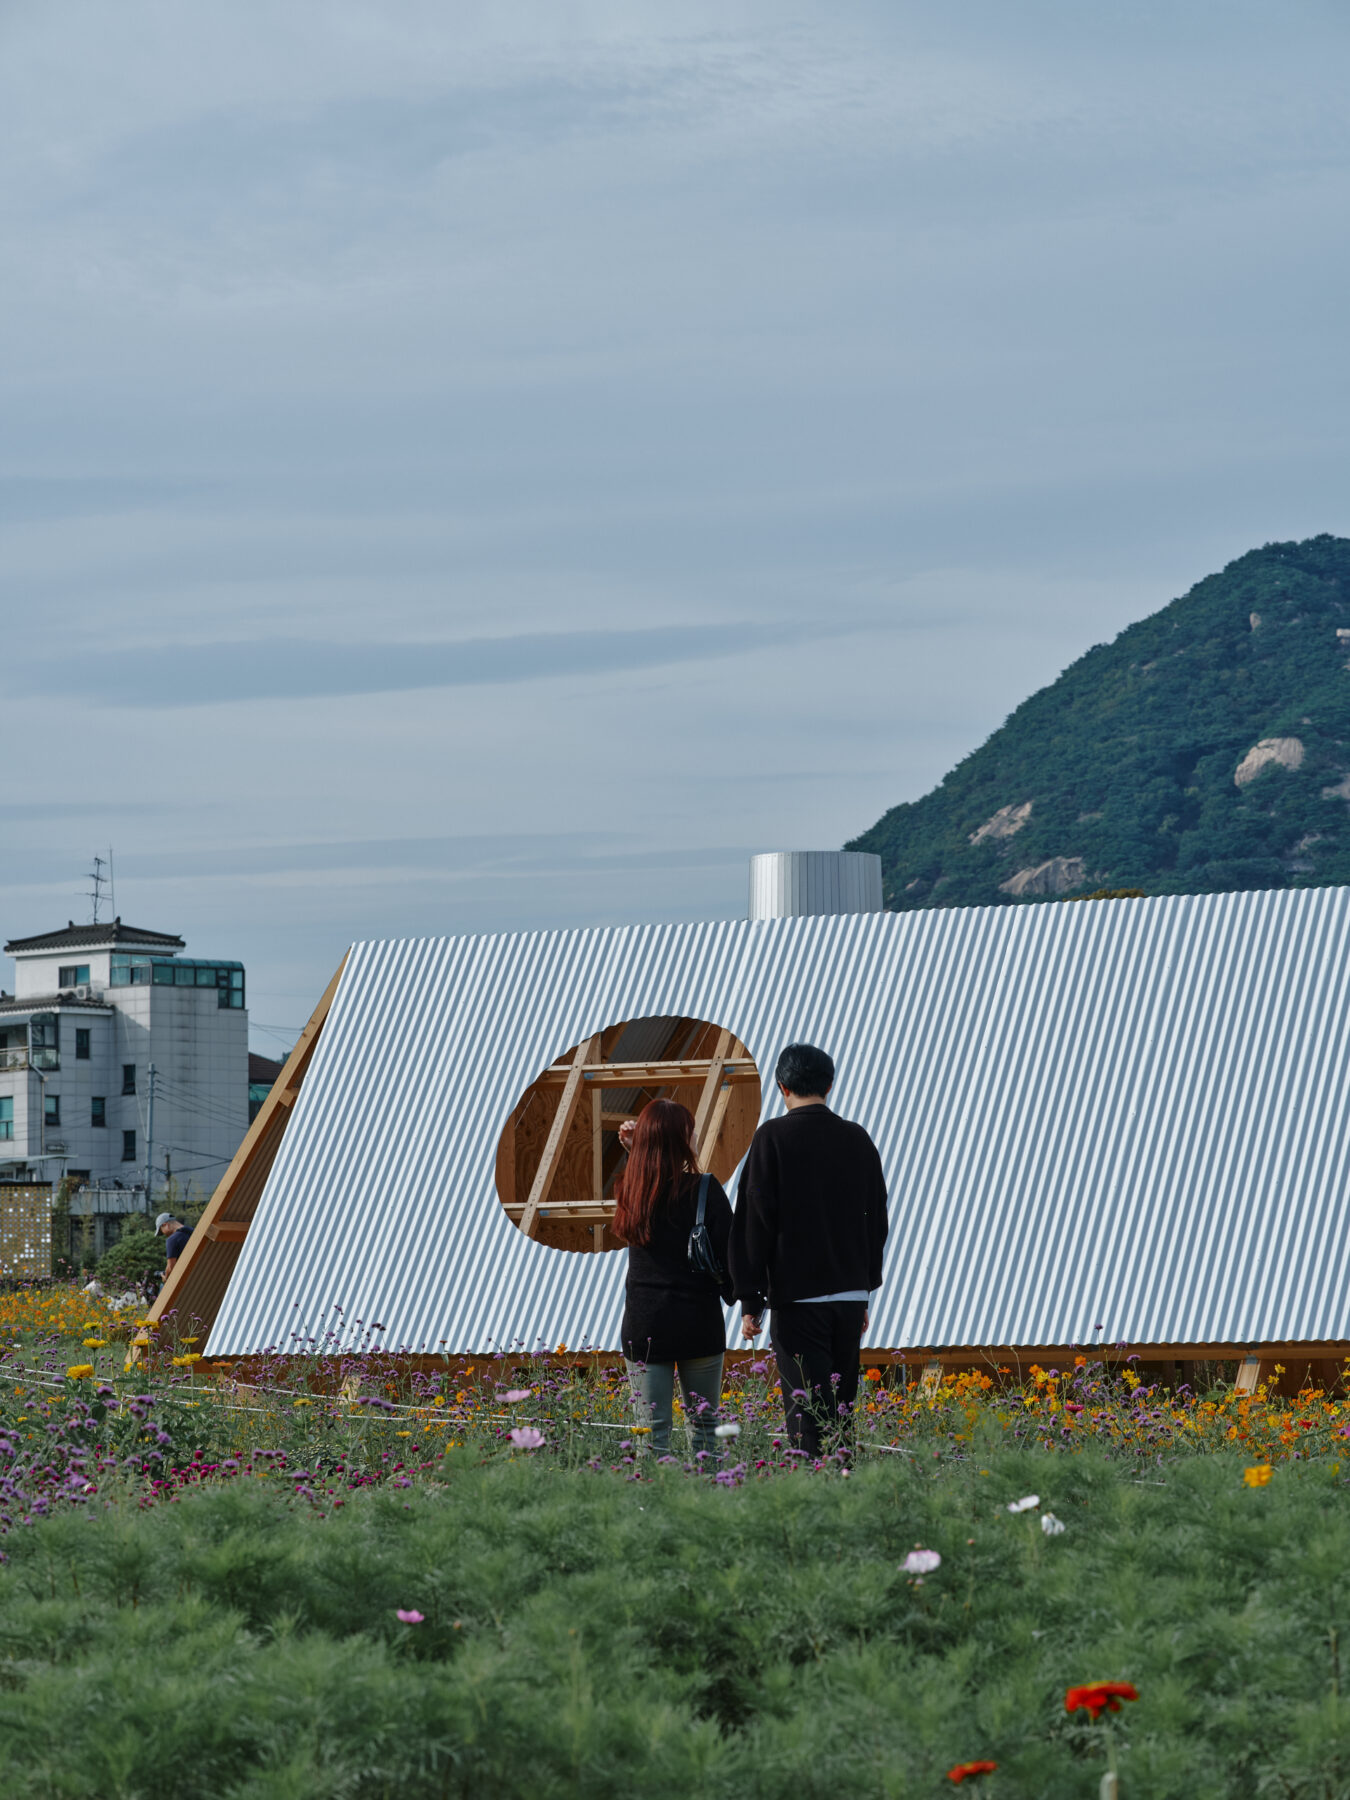 Archisearch The Outdoor Room in Seoul Biennale of Architecture | by Frank Barkow and salazarsequeromedina